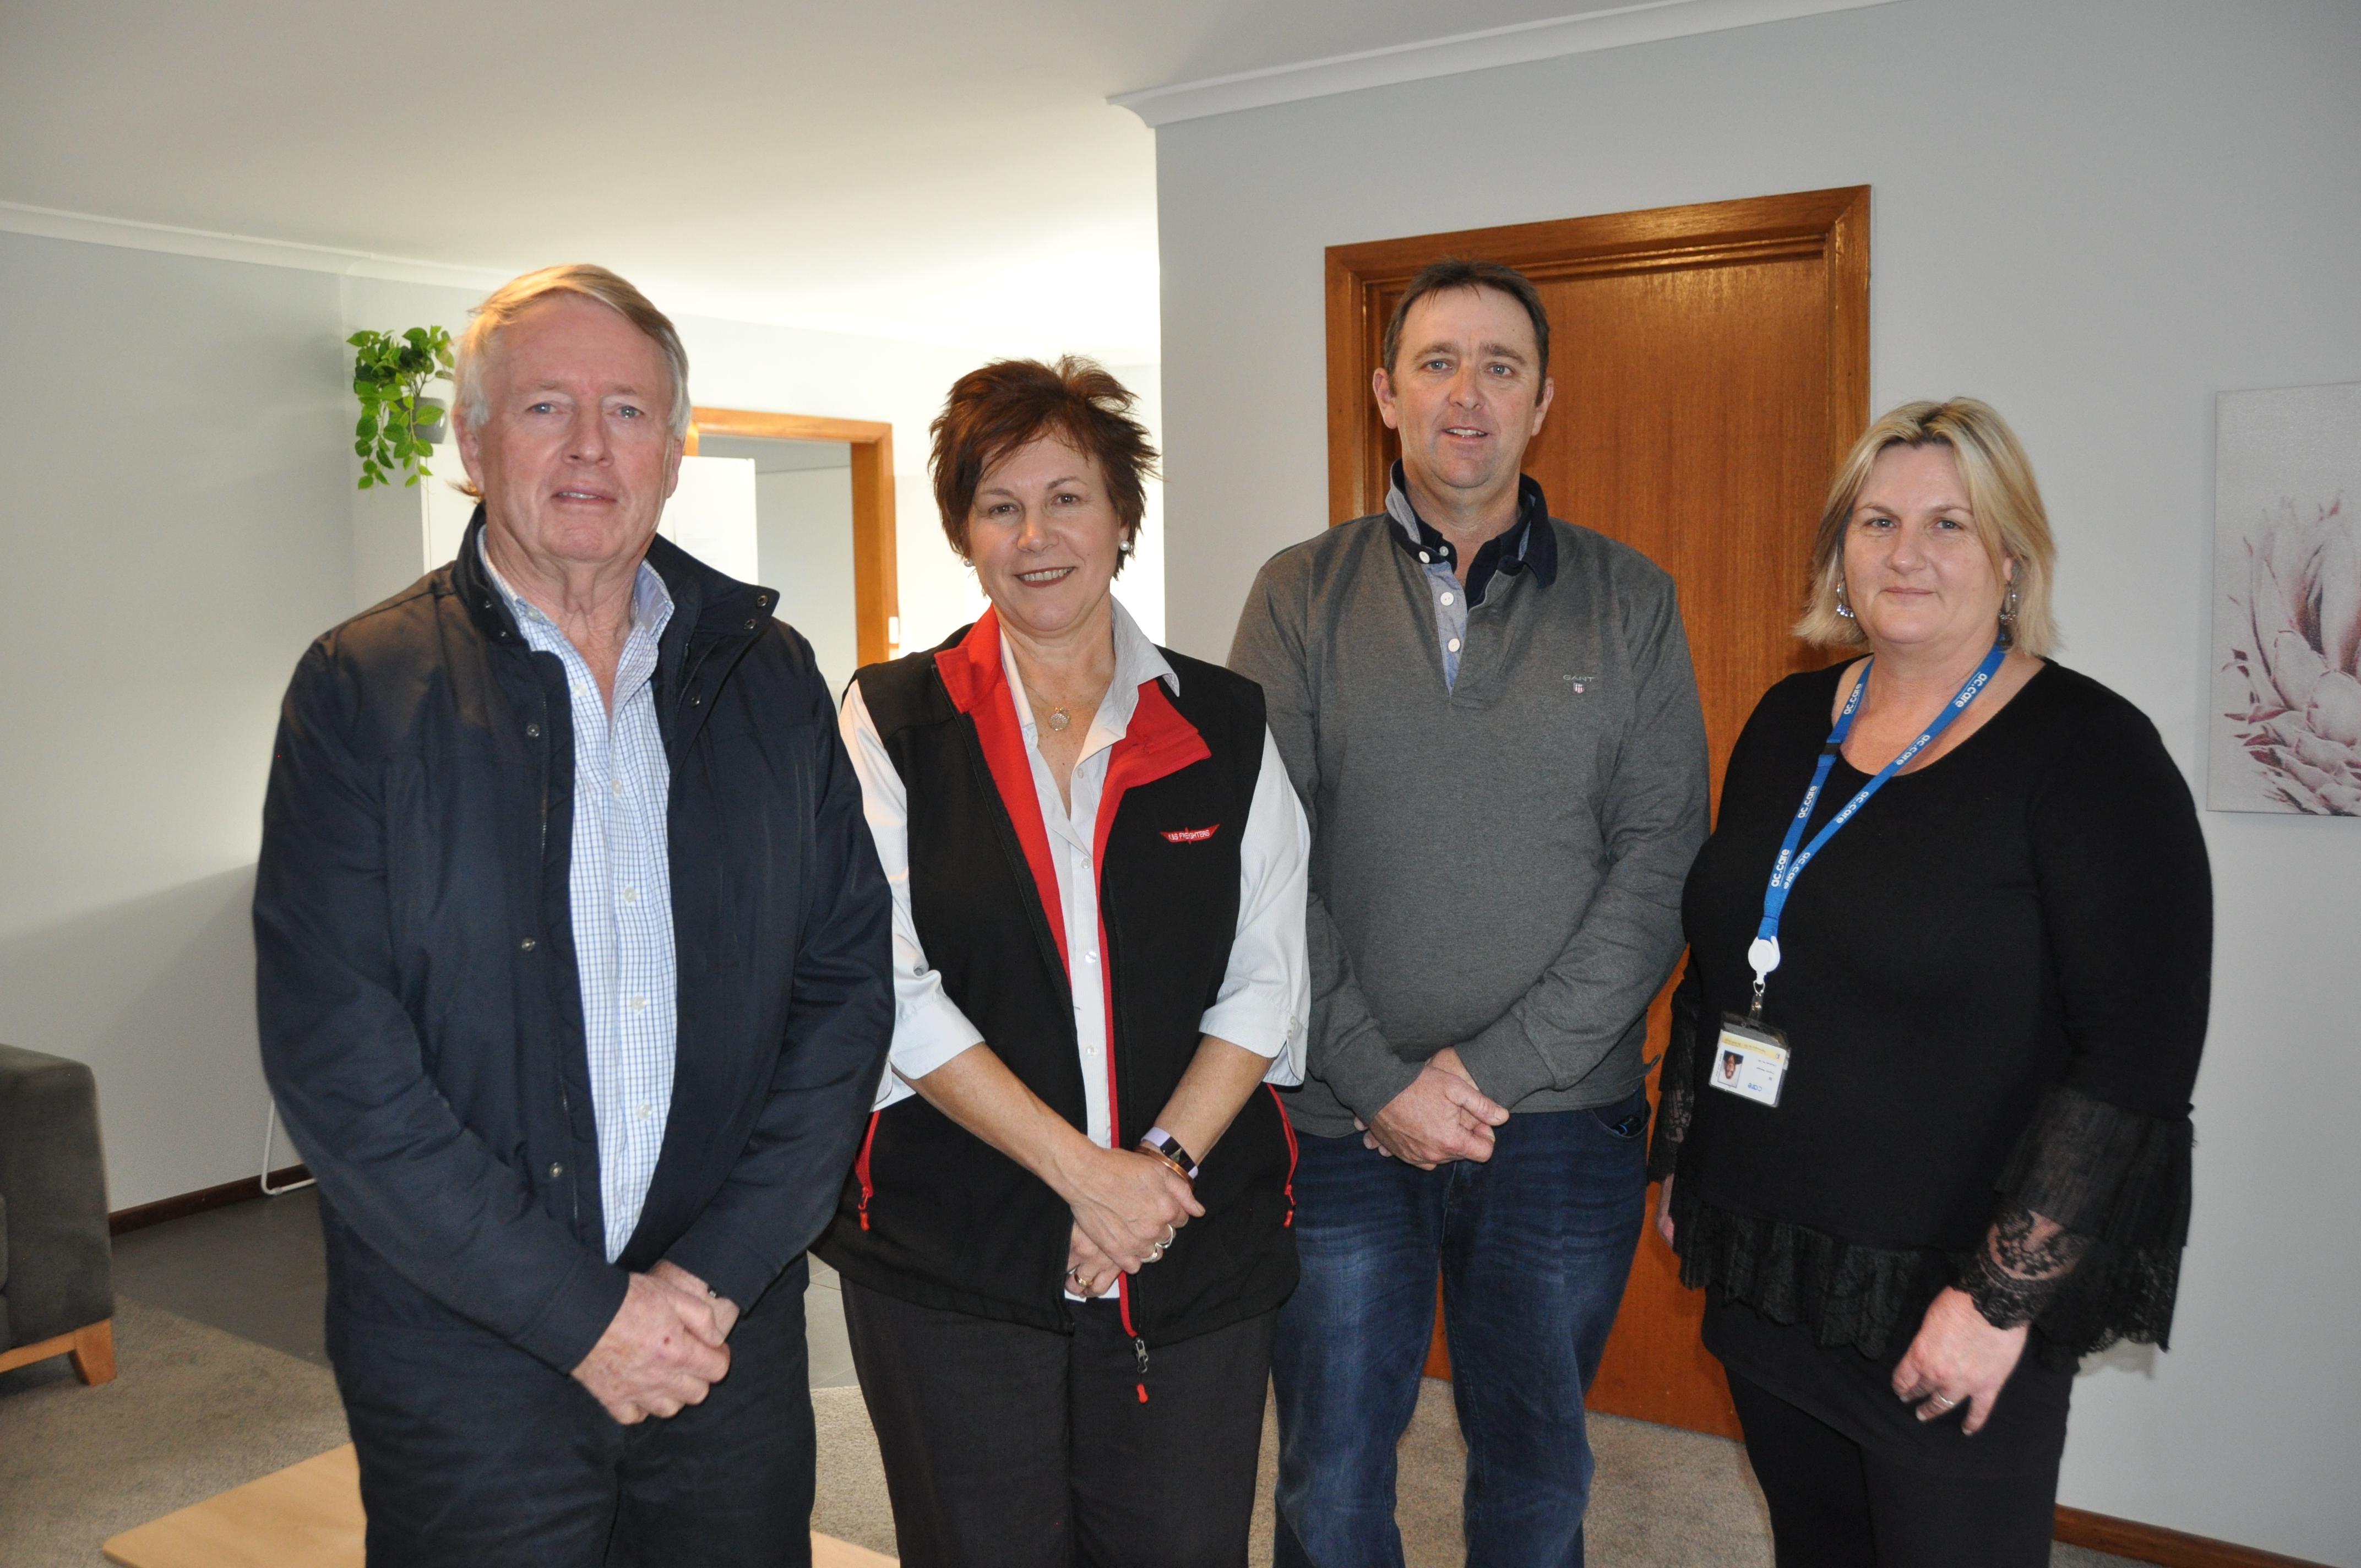 COMMUNITY SUPPORT: Mount Gambier Family Truck Show chairman Peter Burchell, committee member Michelle Nicholls, founder Adam Smith and ac.care Limestone Coast homelessness service manager Jill Pulleine inside the emergency accommodation unit maintained with funding from the annual event to help people in crisis.